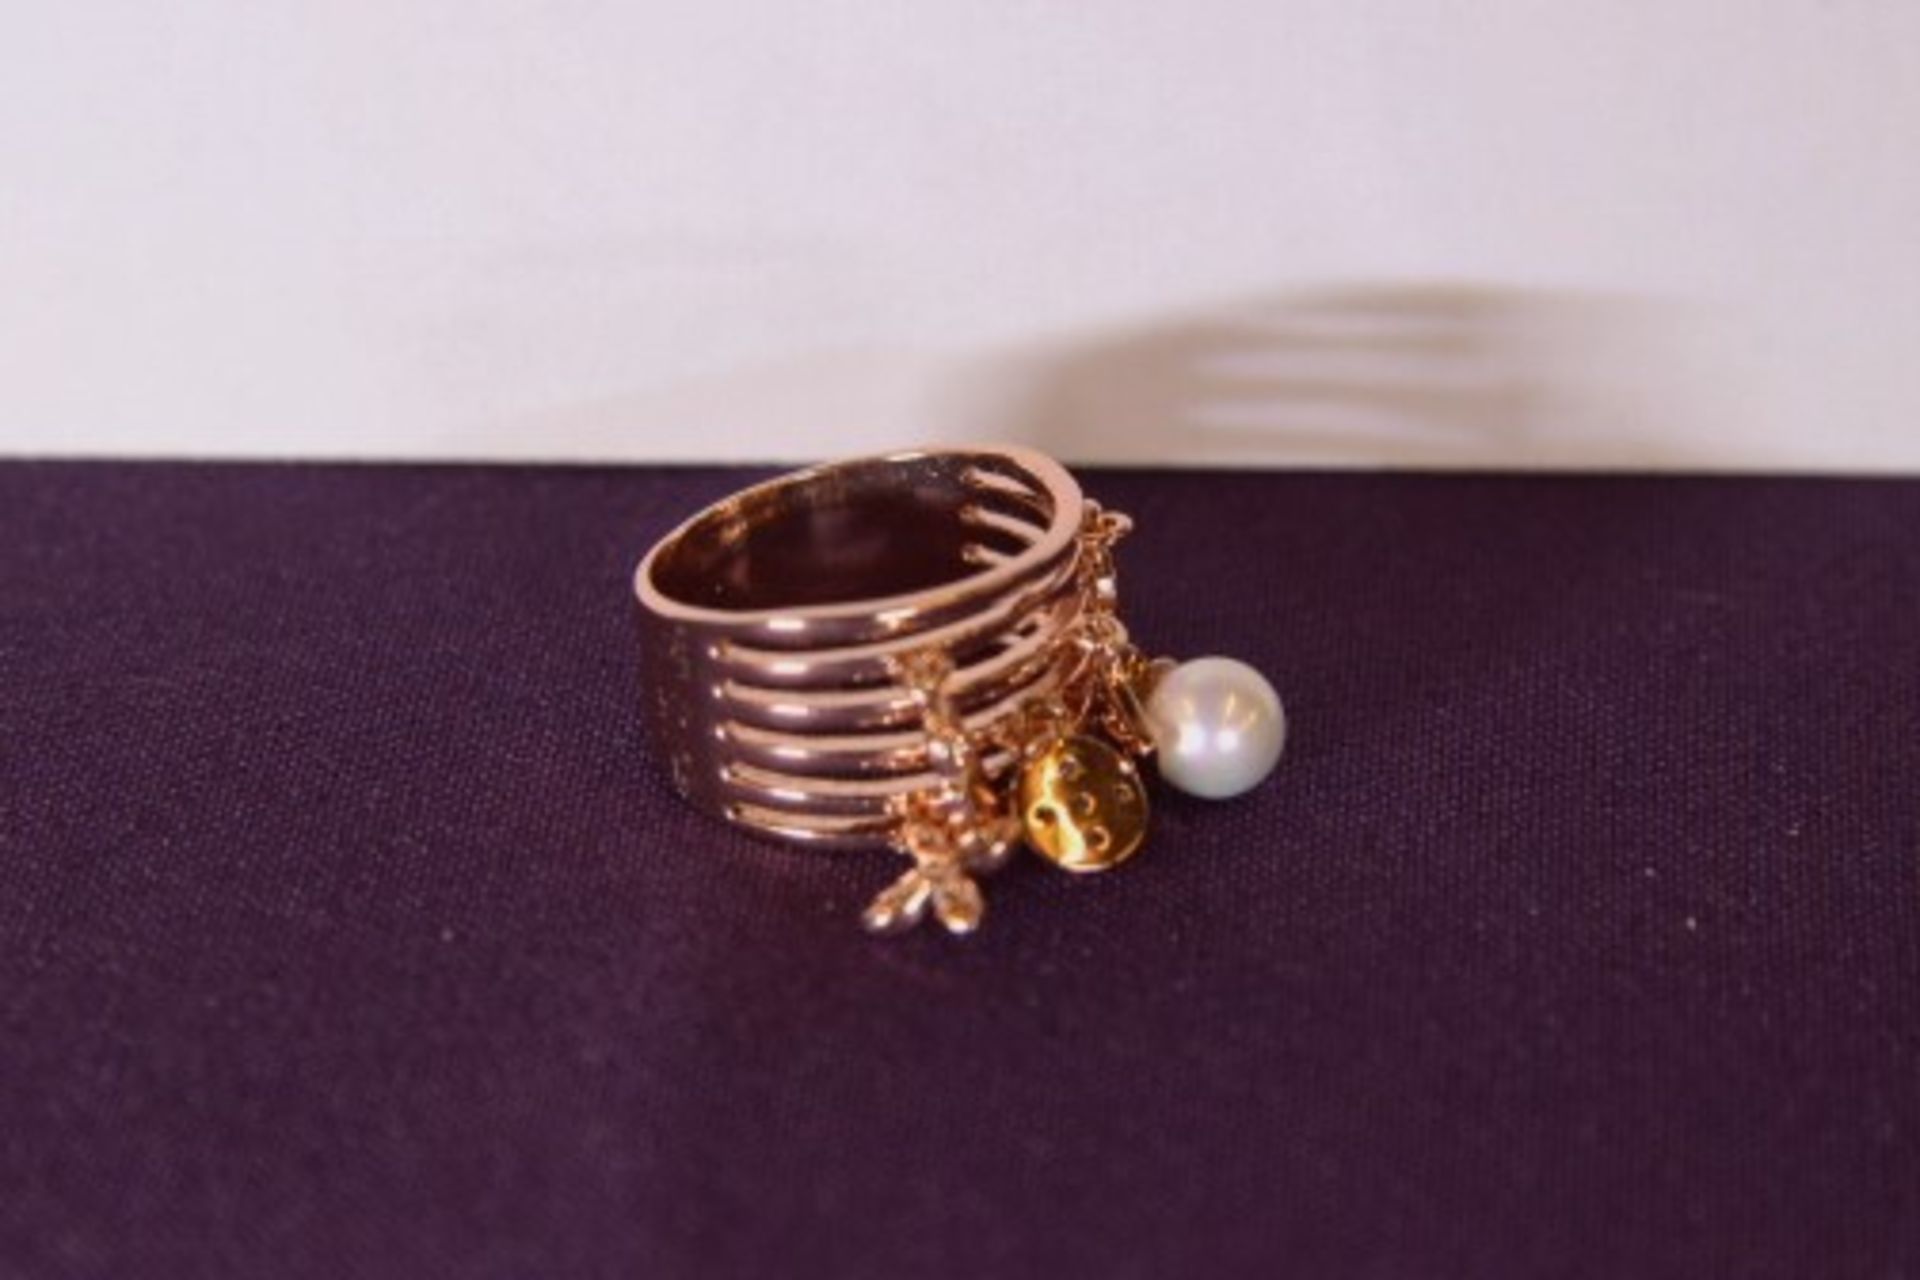 V *TRADE QTY* Brand New Rose Colour Multi Layer Charm Ring X 4 YOUR BID PRICE TO BE MULTIPLIED BY